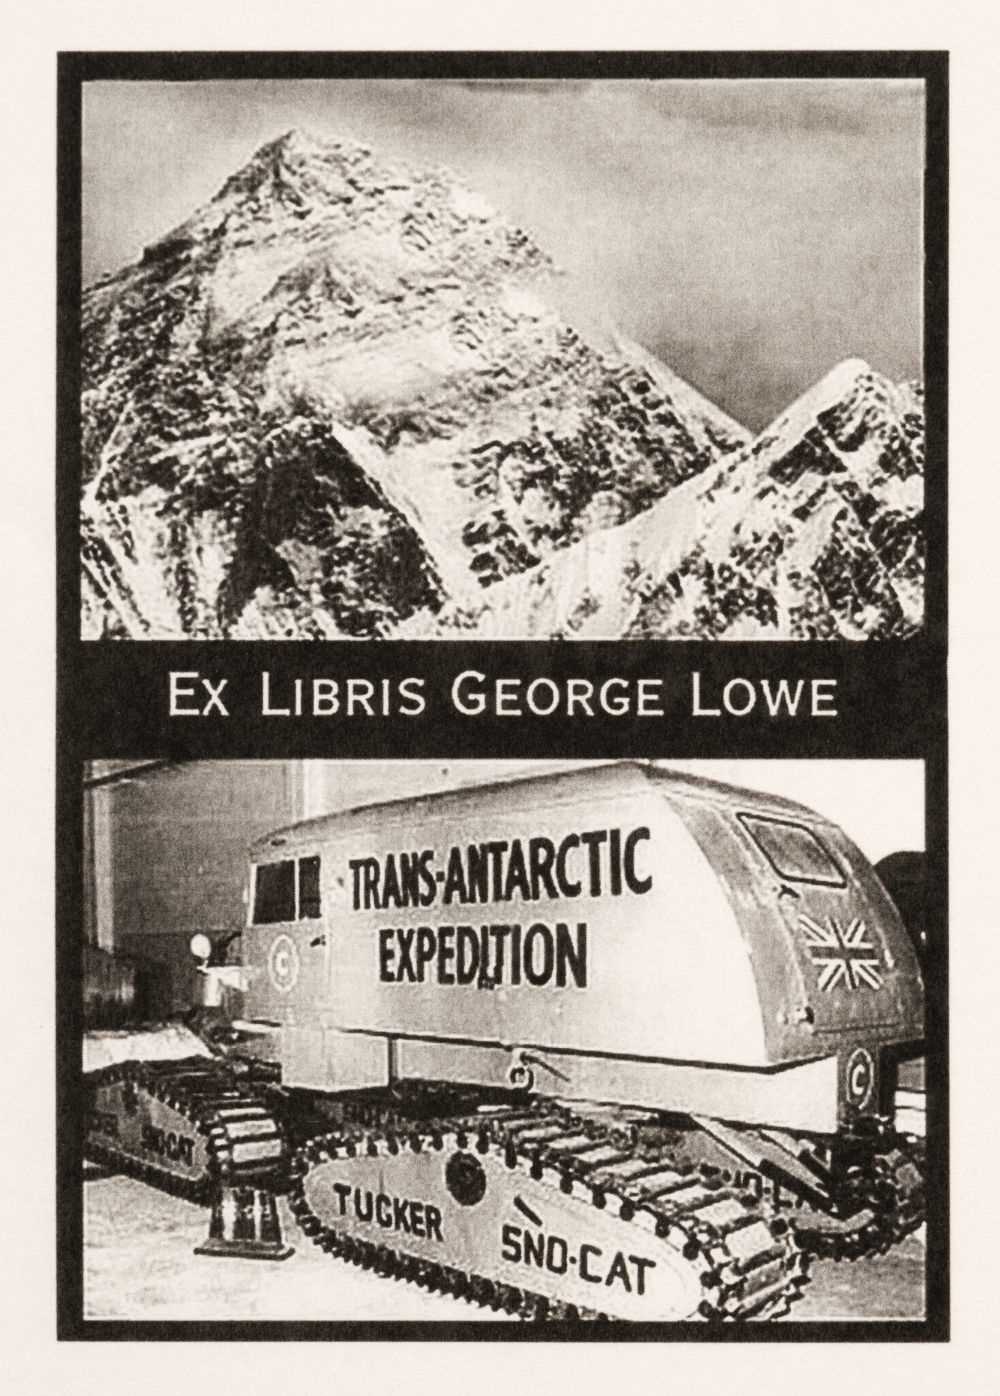 Lot 21 - Lowe (George, 1924-2013). Collection of 40 mountaineering books ex libris George Lowe